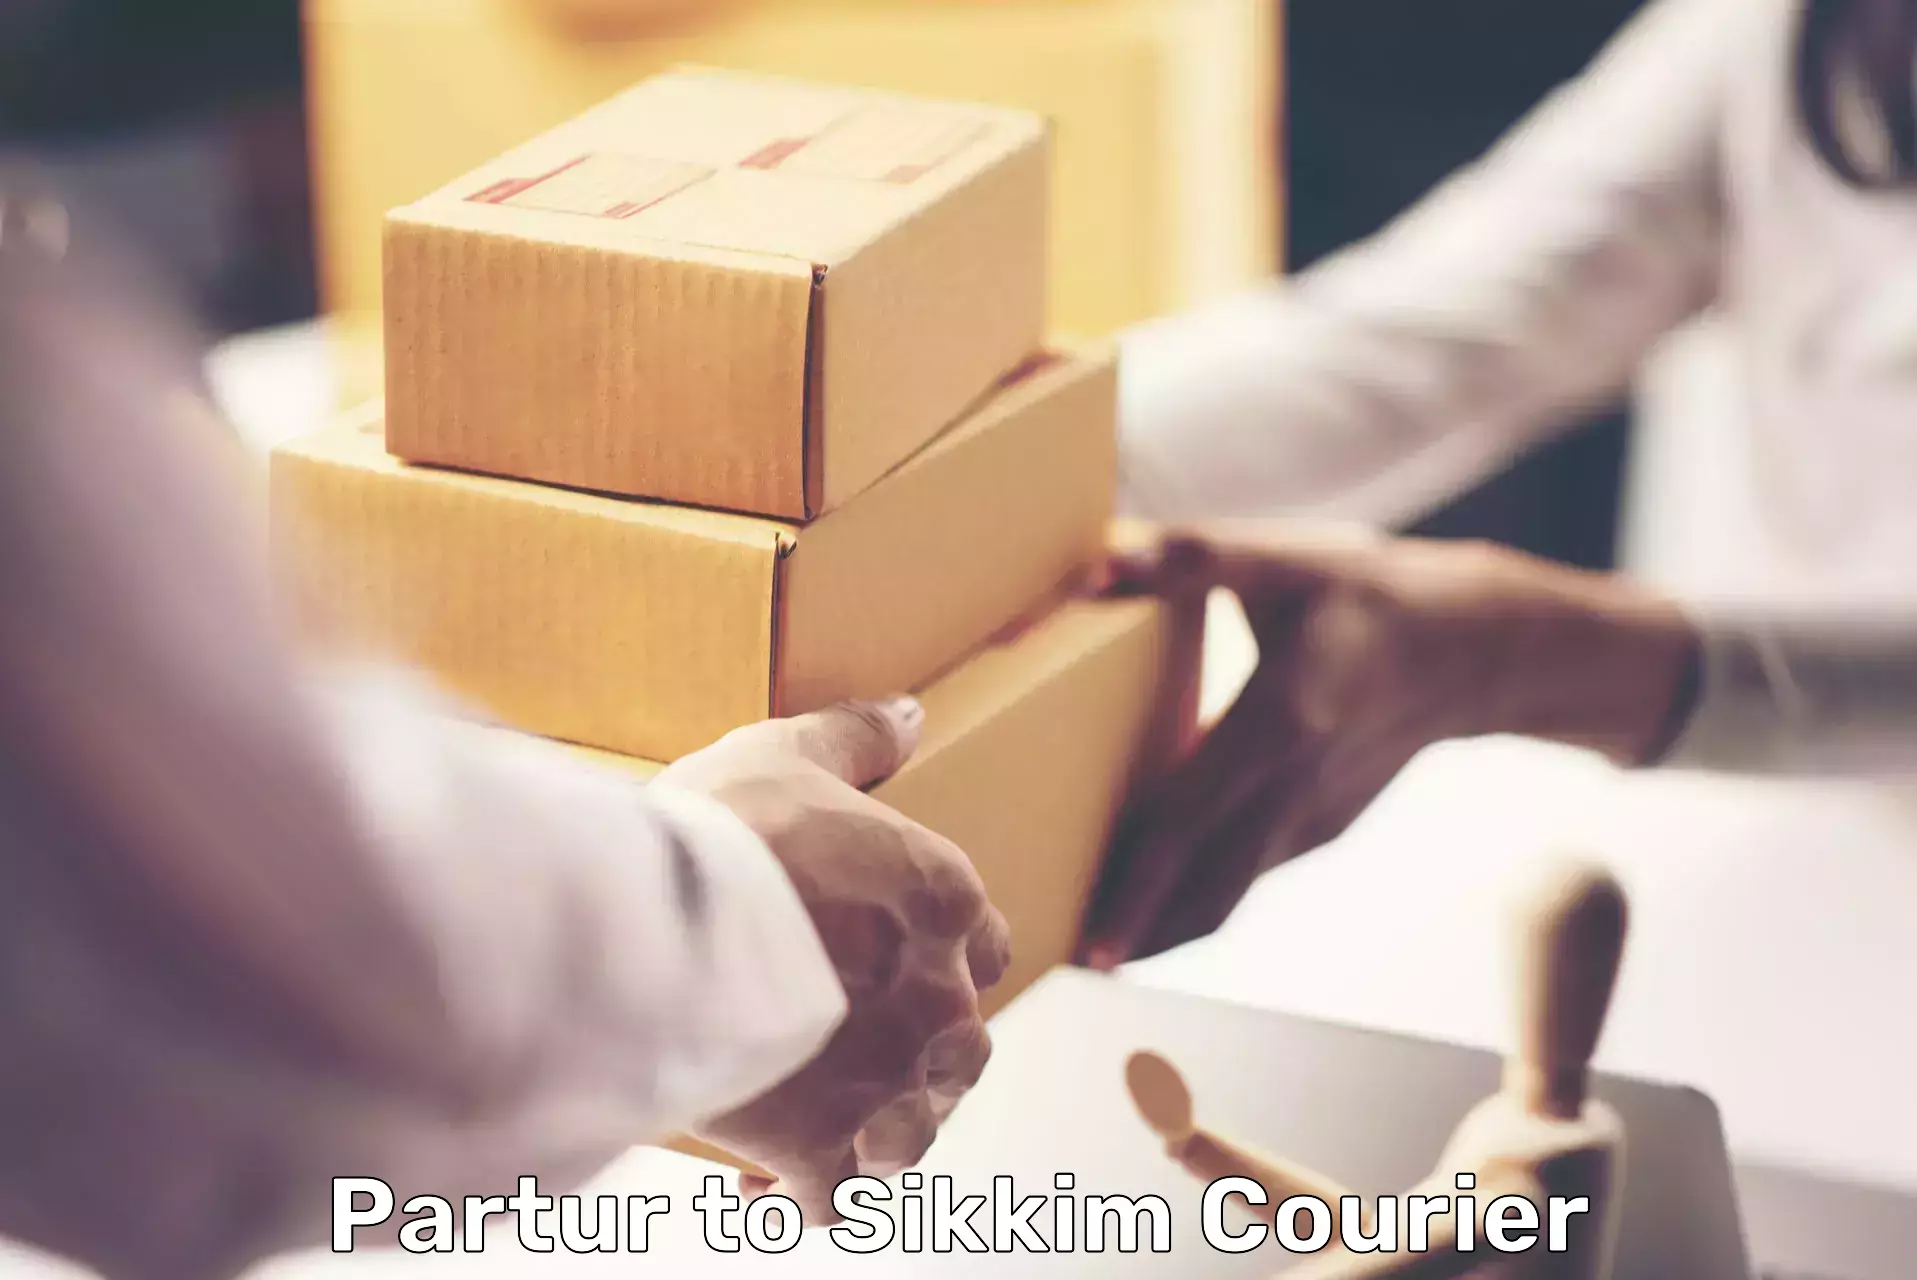 Sustainable shipping practices Partur to Sikkim